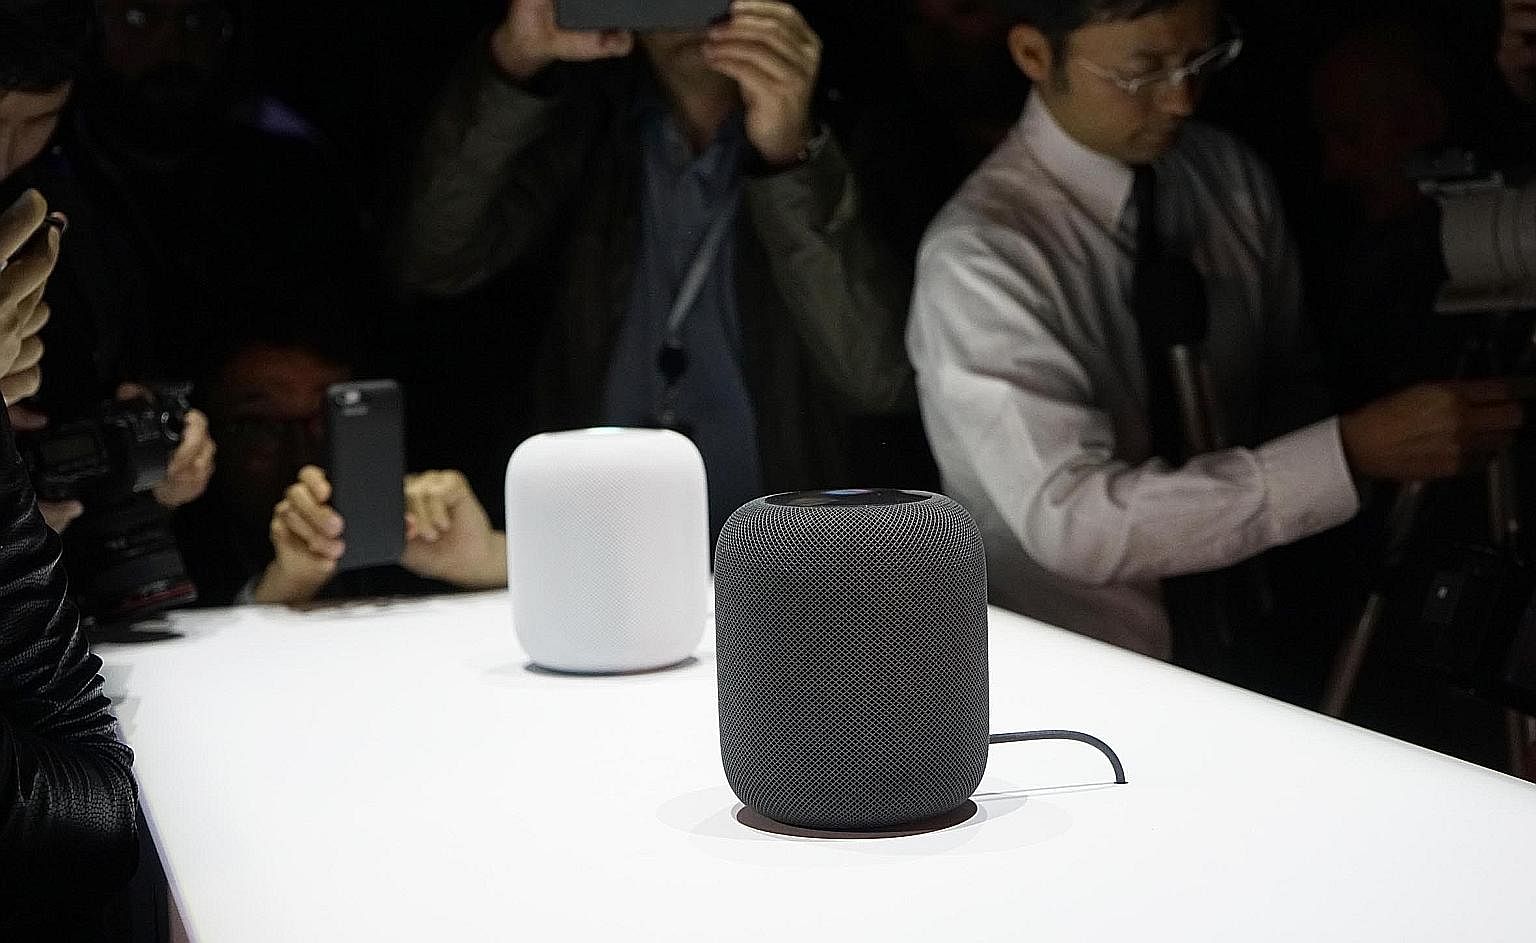 HomePod smart speakers on display at WWDC 2017 last week. While the product will not be available till December, the early announcement shows Apple wants to prevent buyers from rushing into other voice-activated speakers.